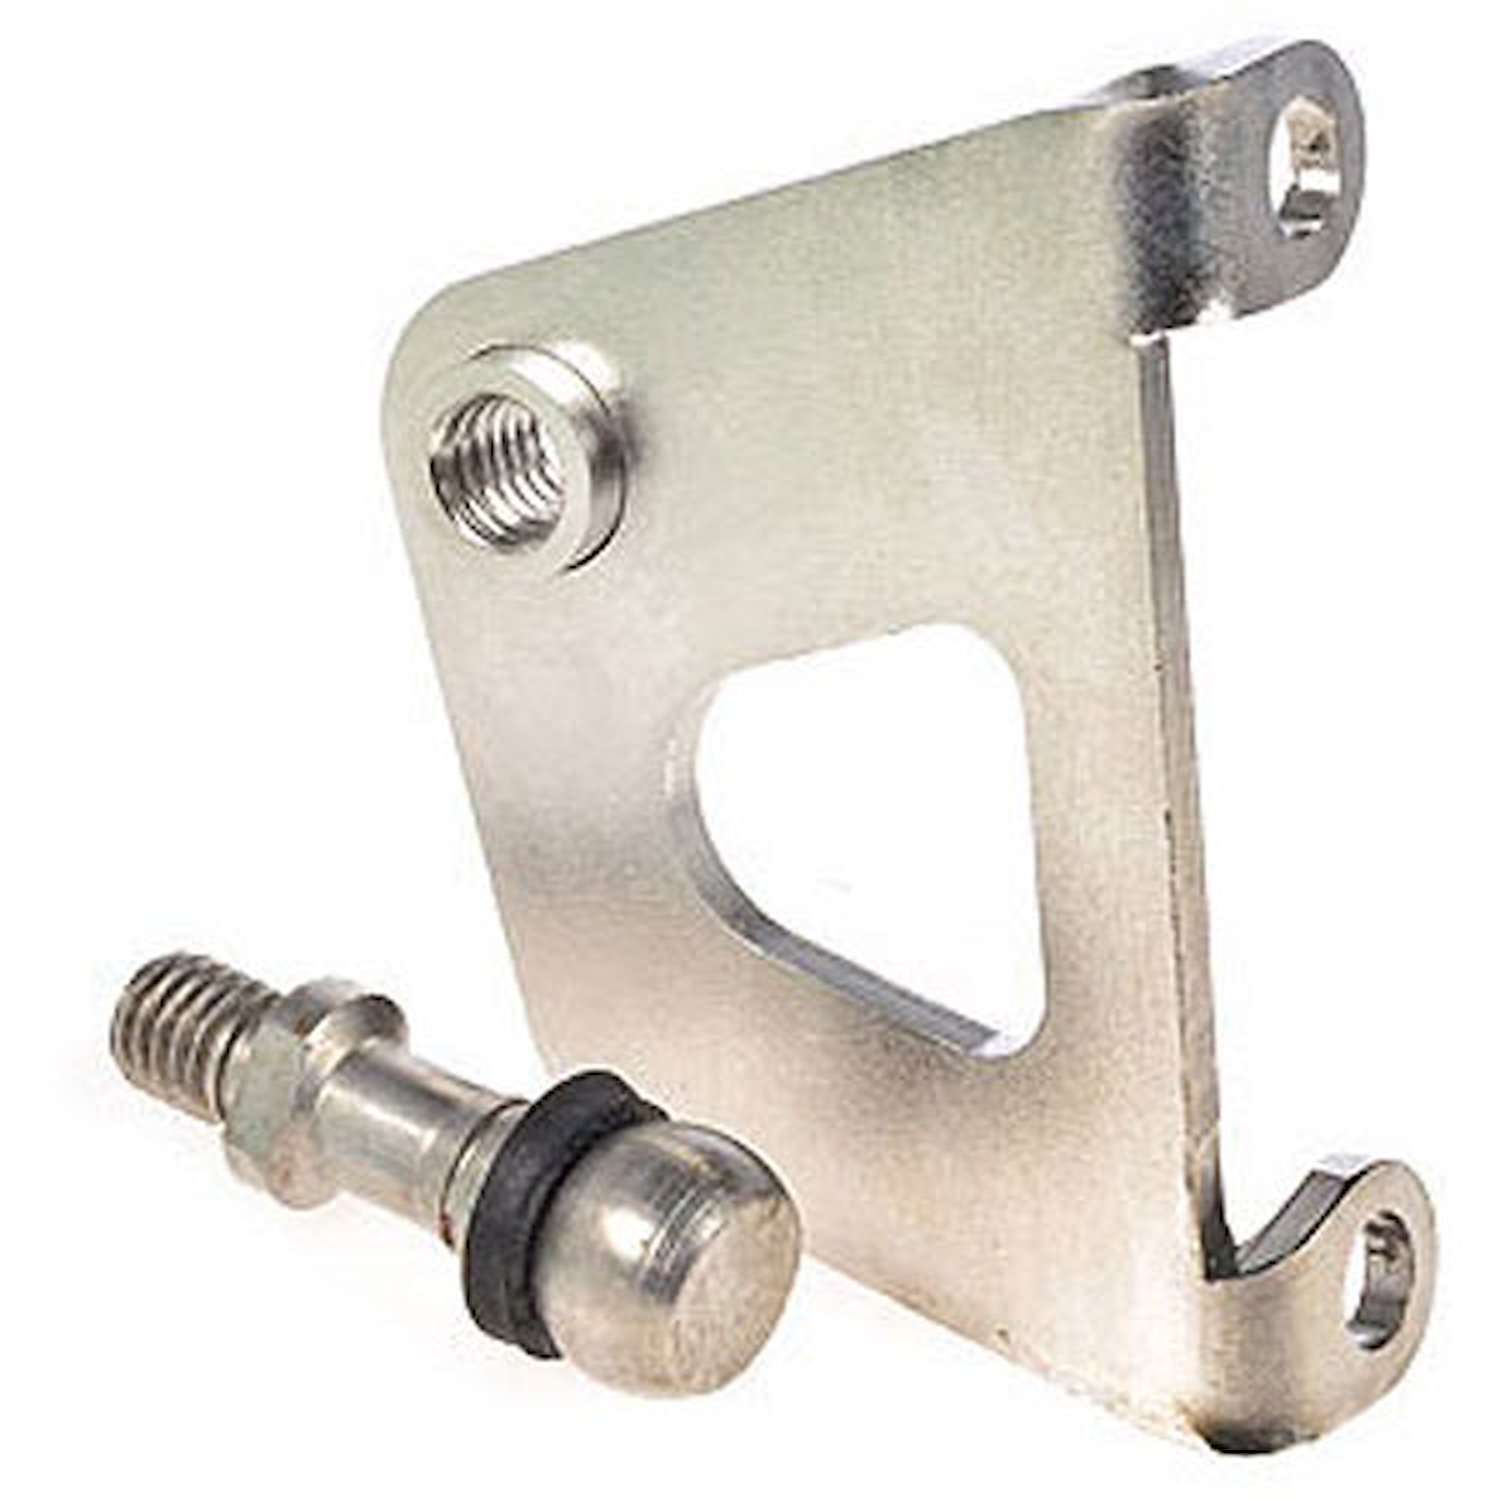 GM Clutch Pivot Ball Bracket for Cars and